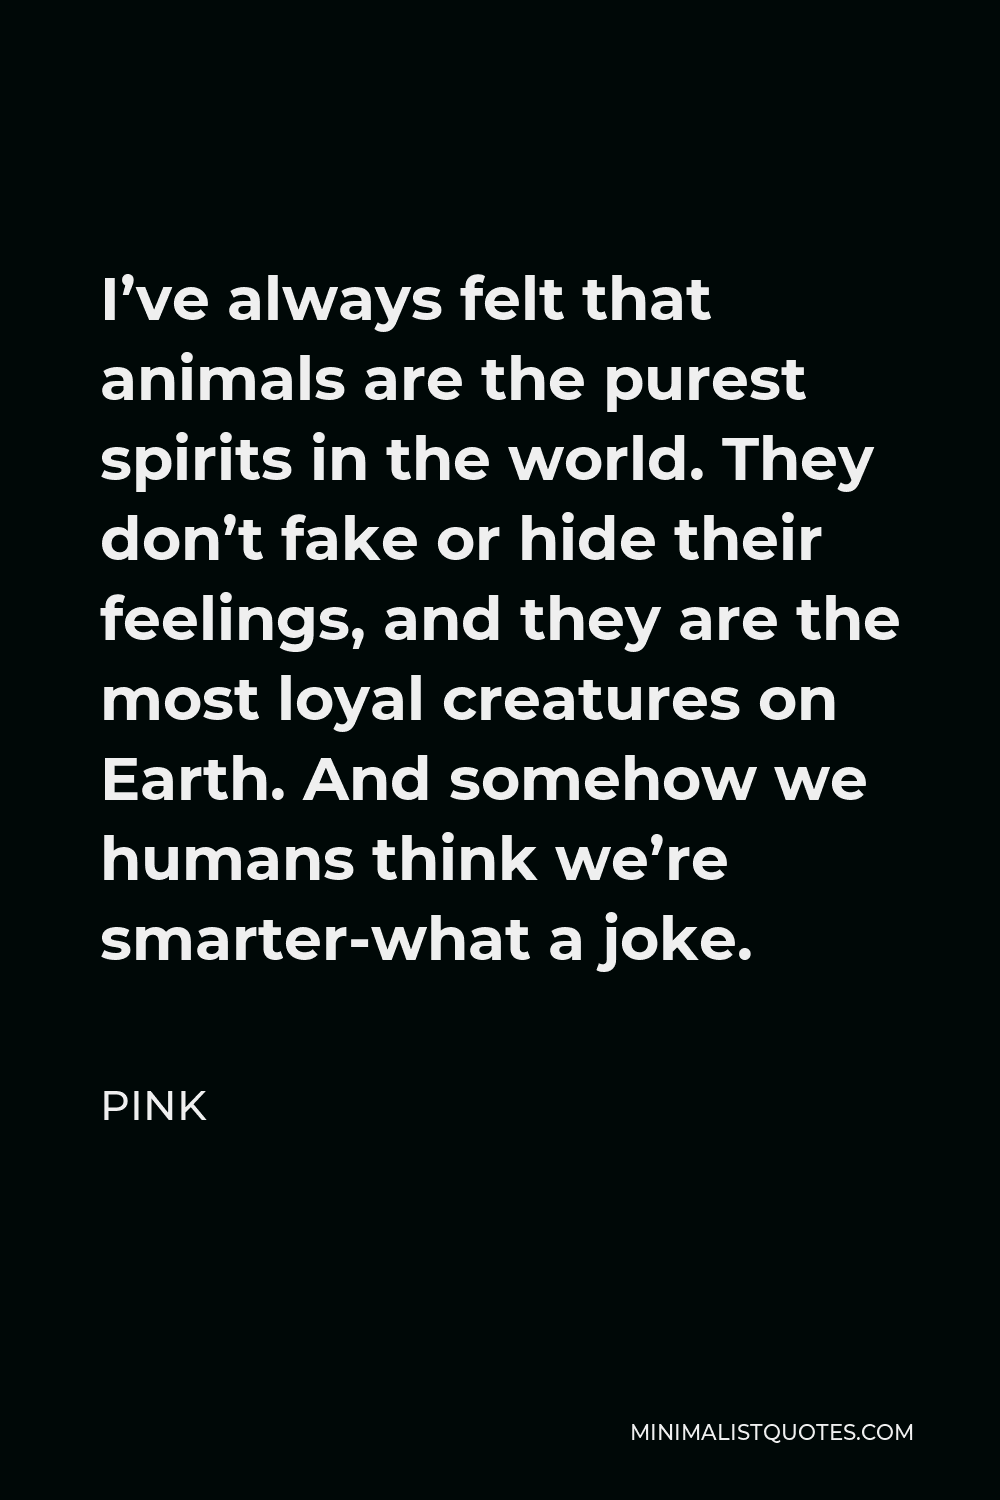 Pink Quote - I’ve always felt that animals are the purest spirits in the world. They don’t fake or hide their feelings, and they are the most loyal creatures on Earth. And somehow we humans think we’re smarter-what a joke.